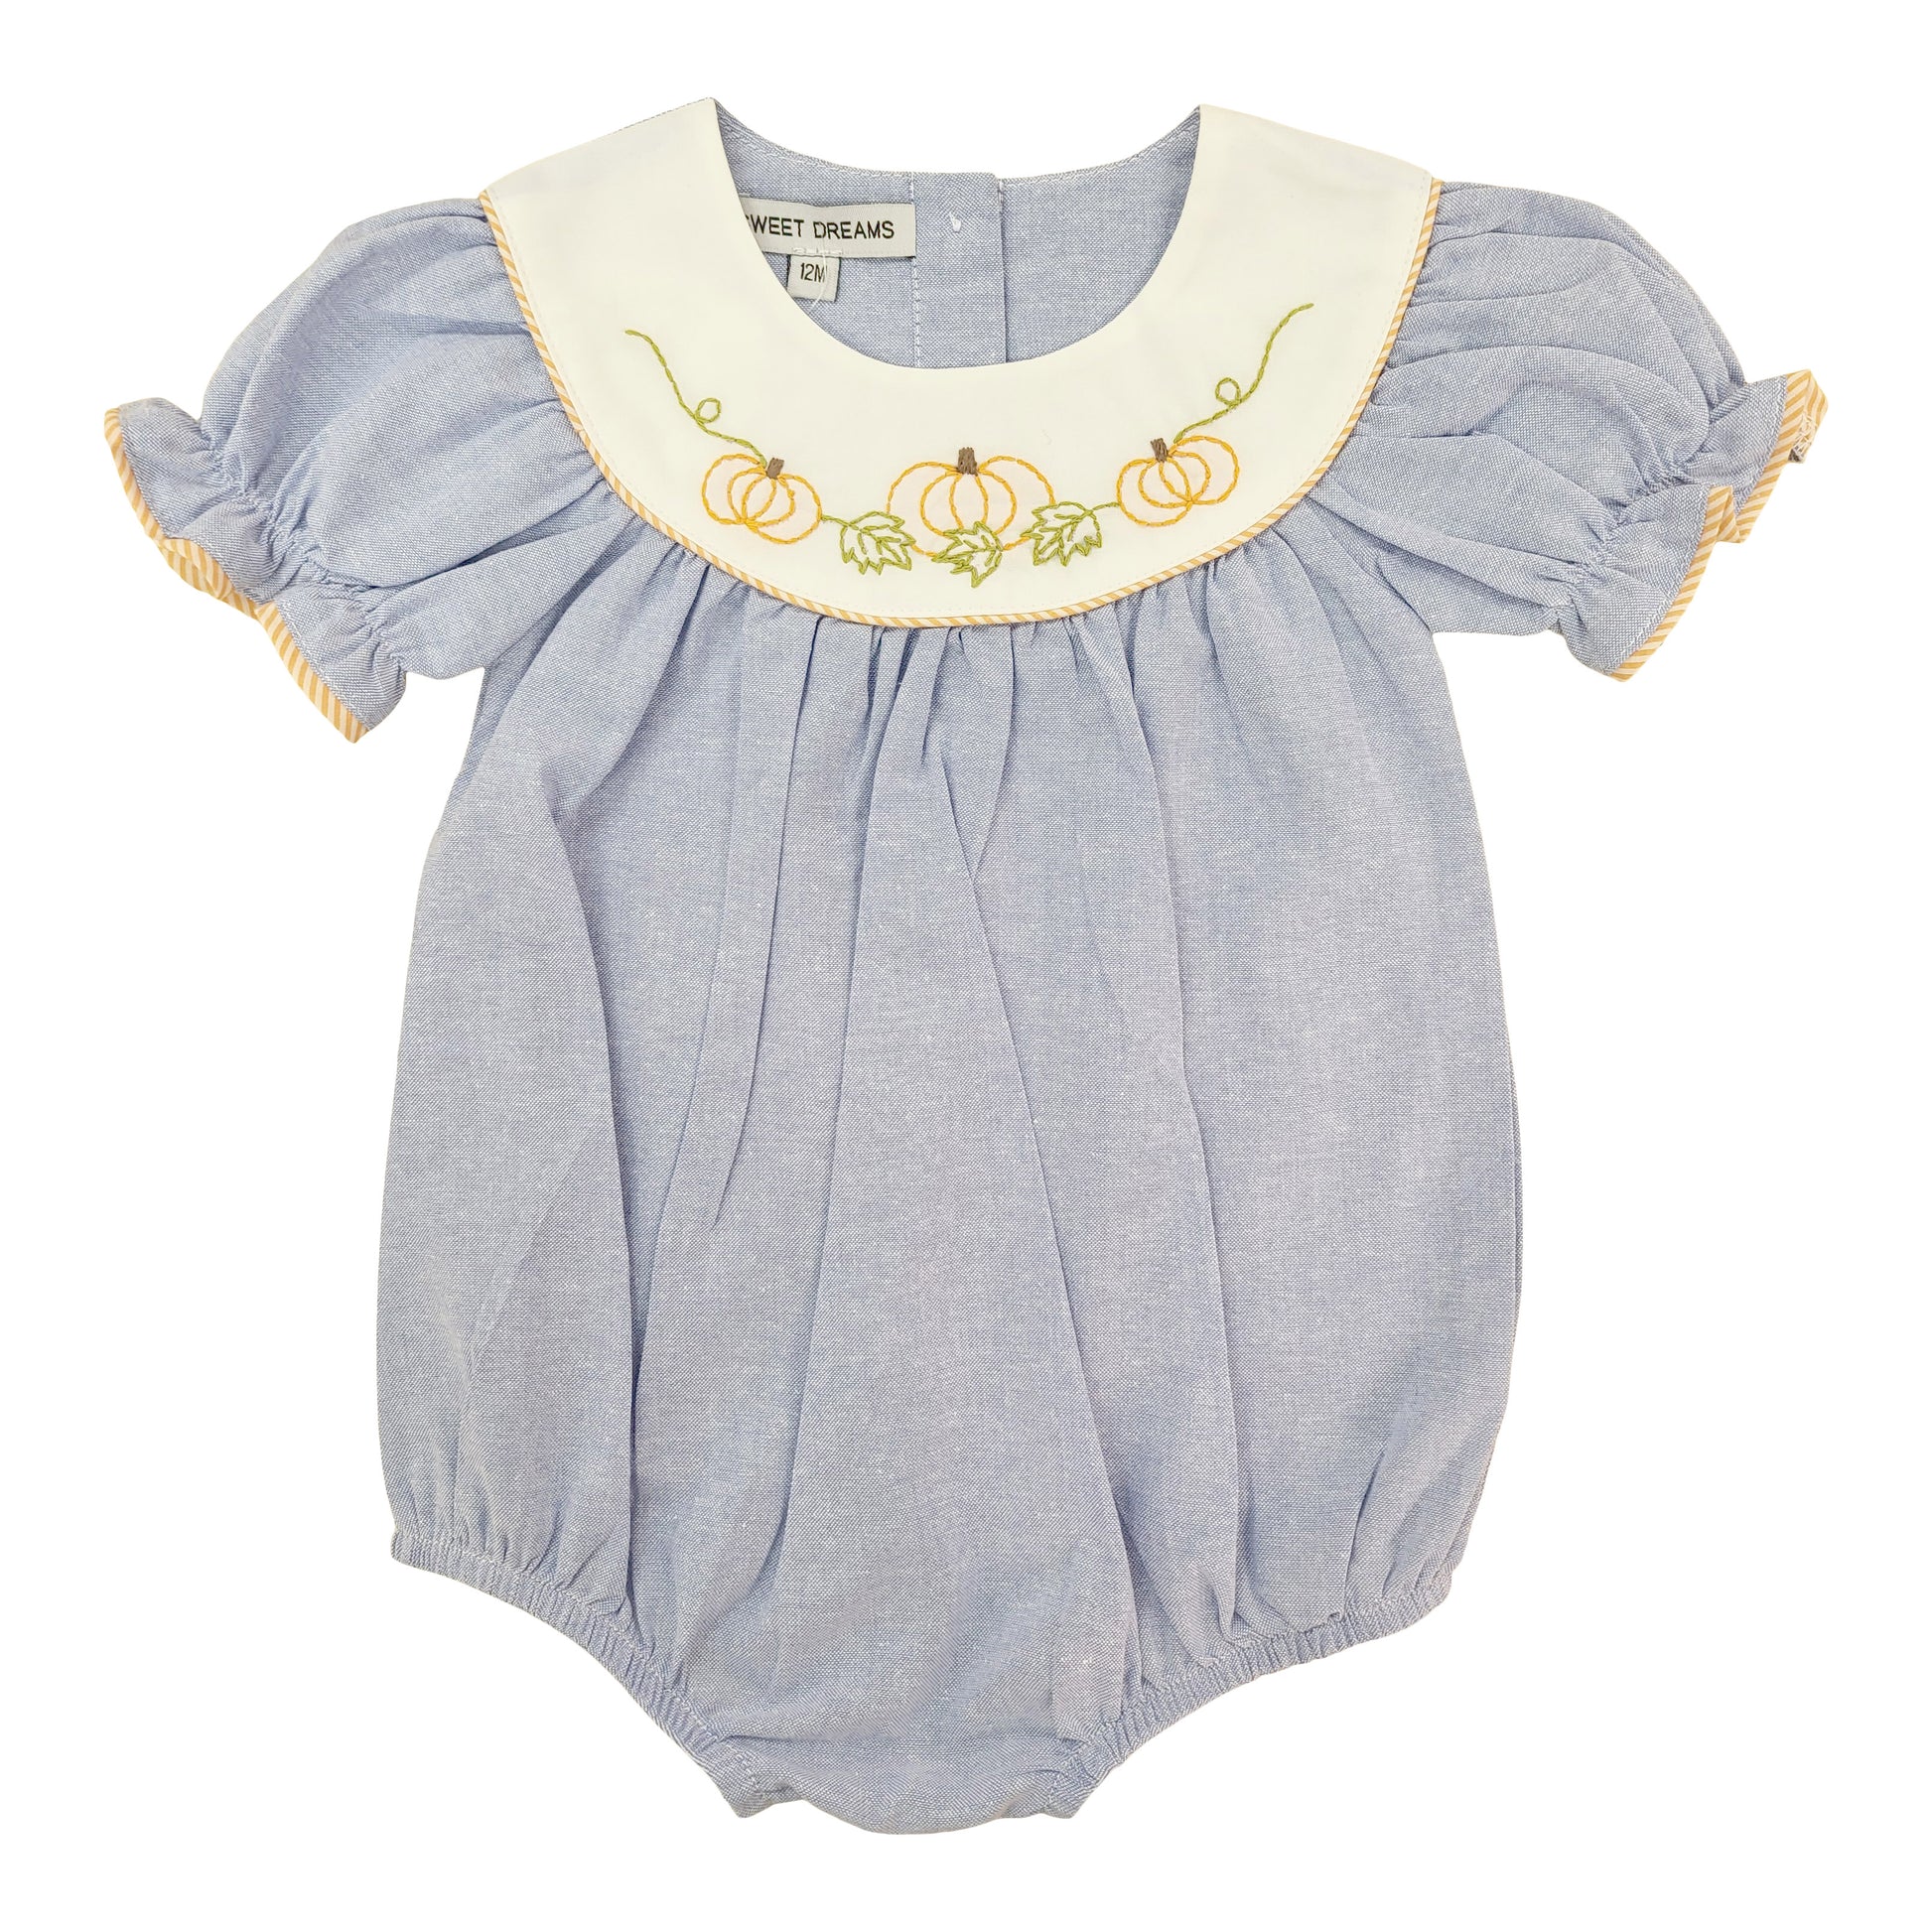 Blue chambray girls bubble with pumpkin embroidery on collar by Sweet Dreams,